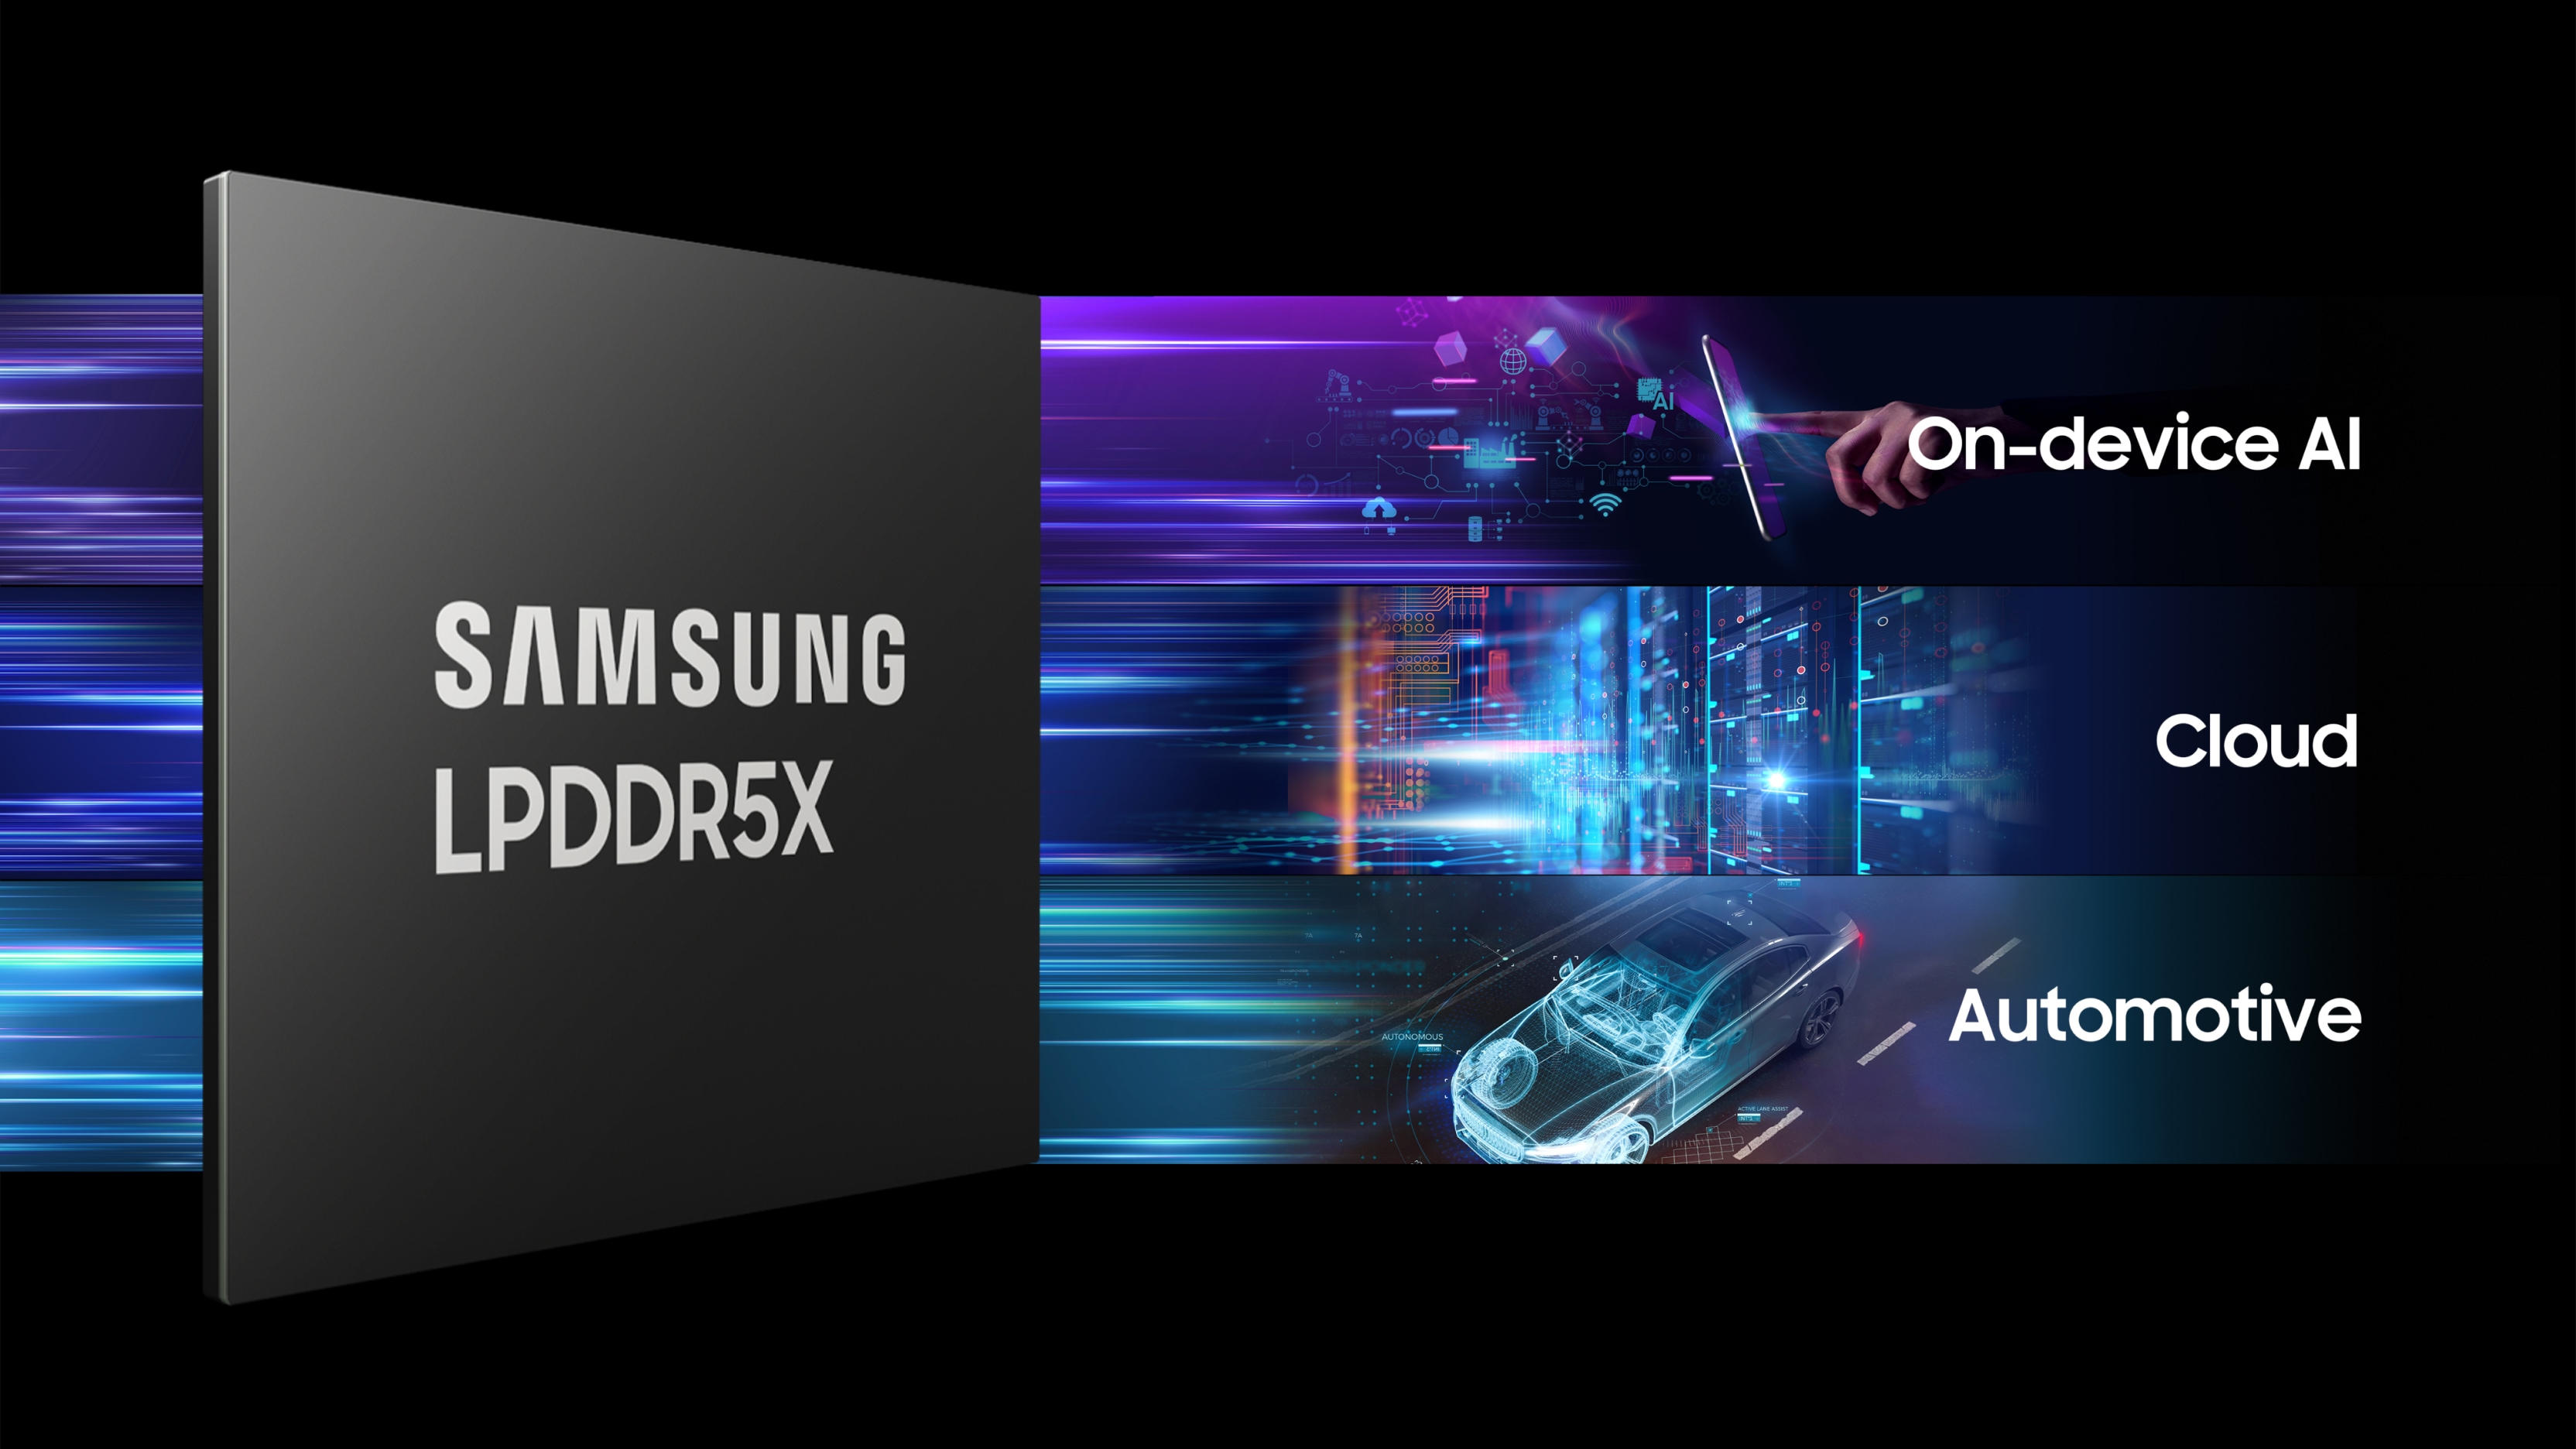 Samsung Develops Industry’s Fastest 10.7Gbps  LPDDR5X DRAM, Optimized for AI Applications